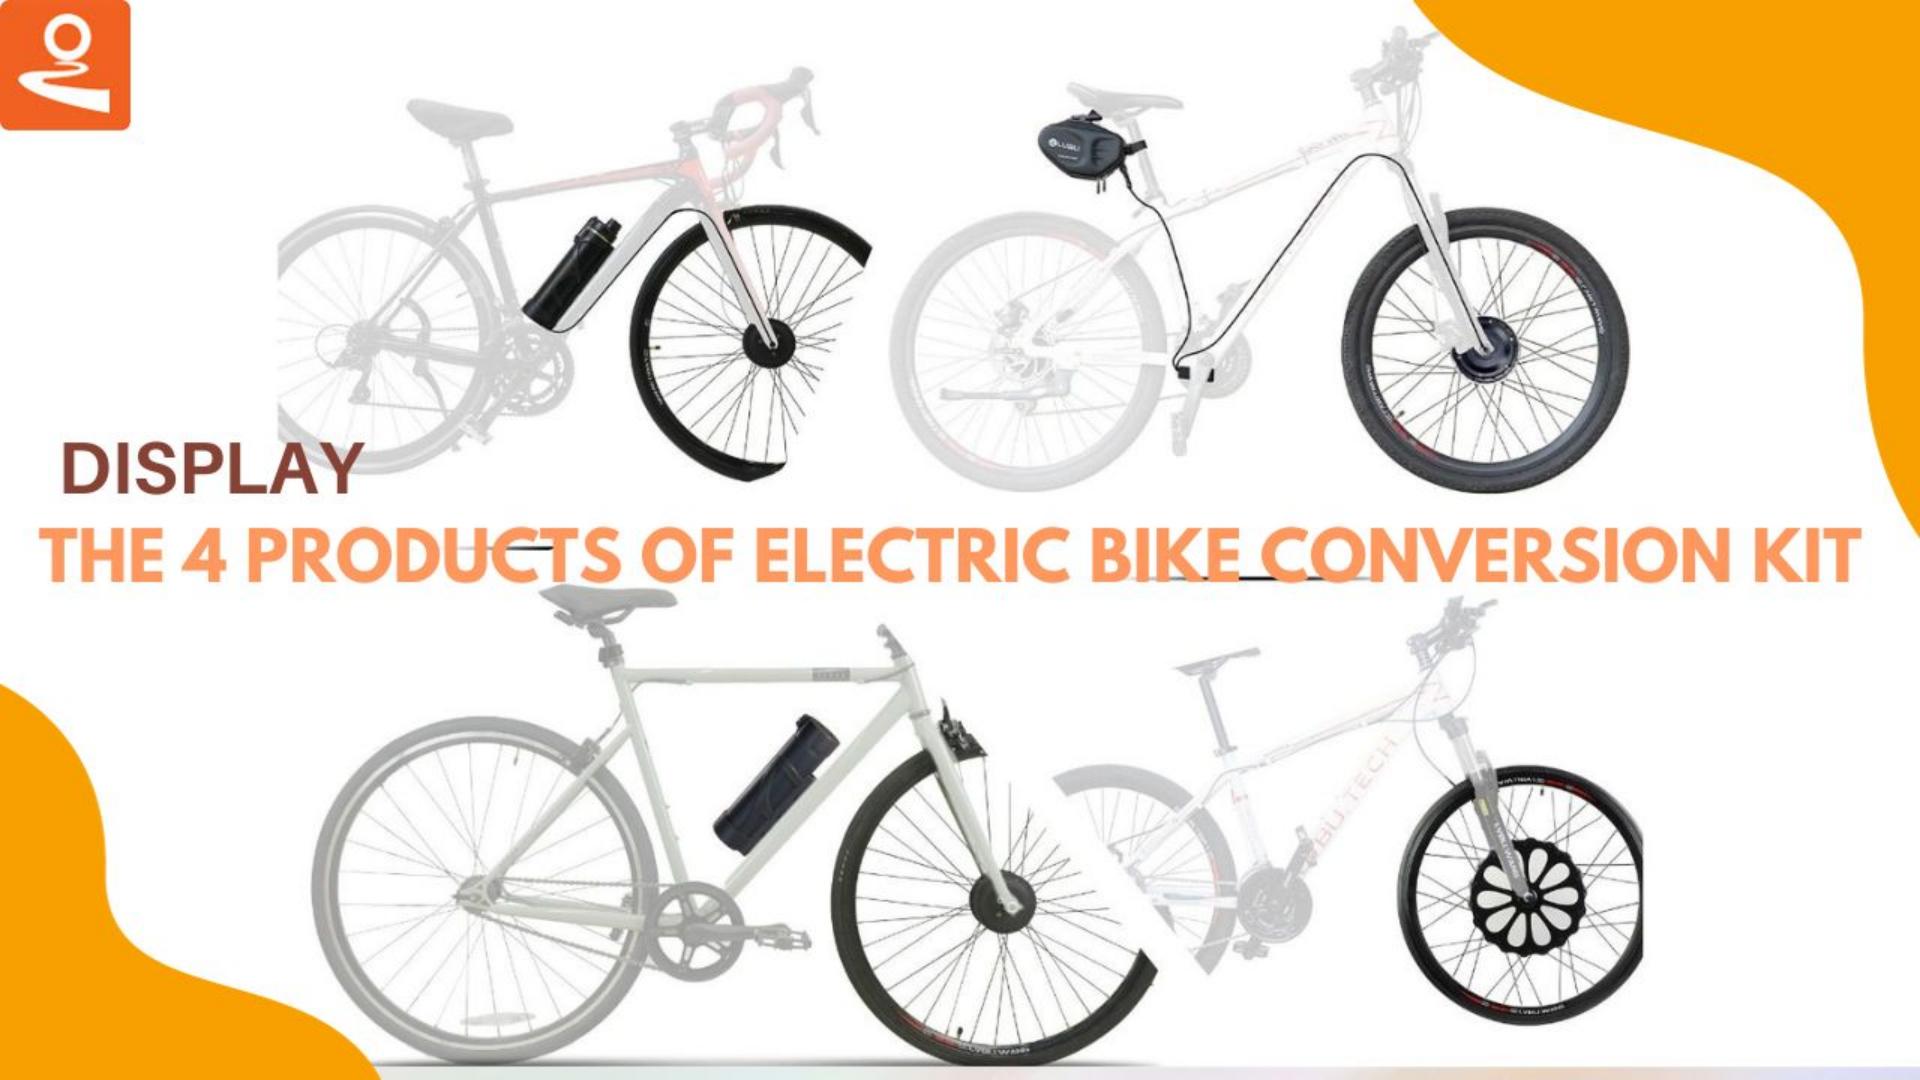 Display the 4 products of electric bike conversion kit